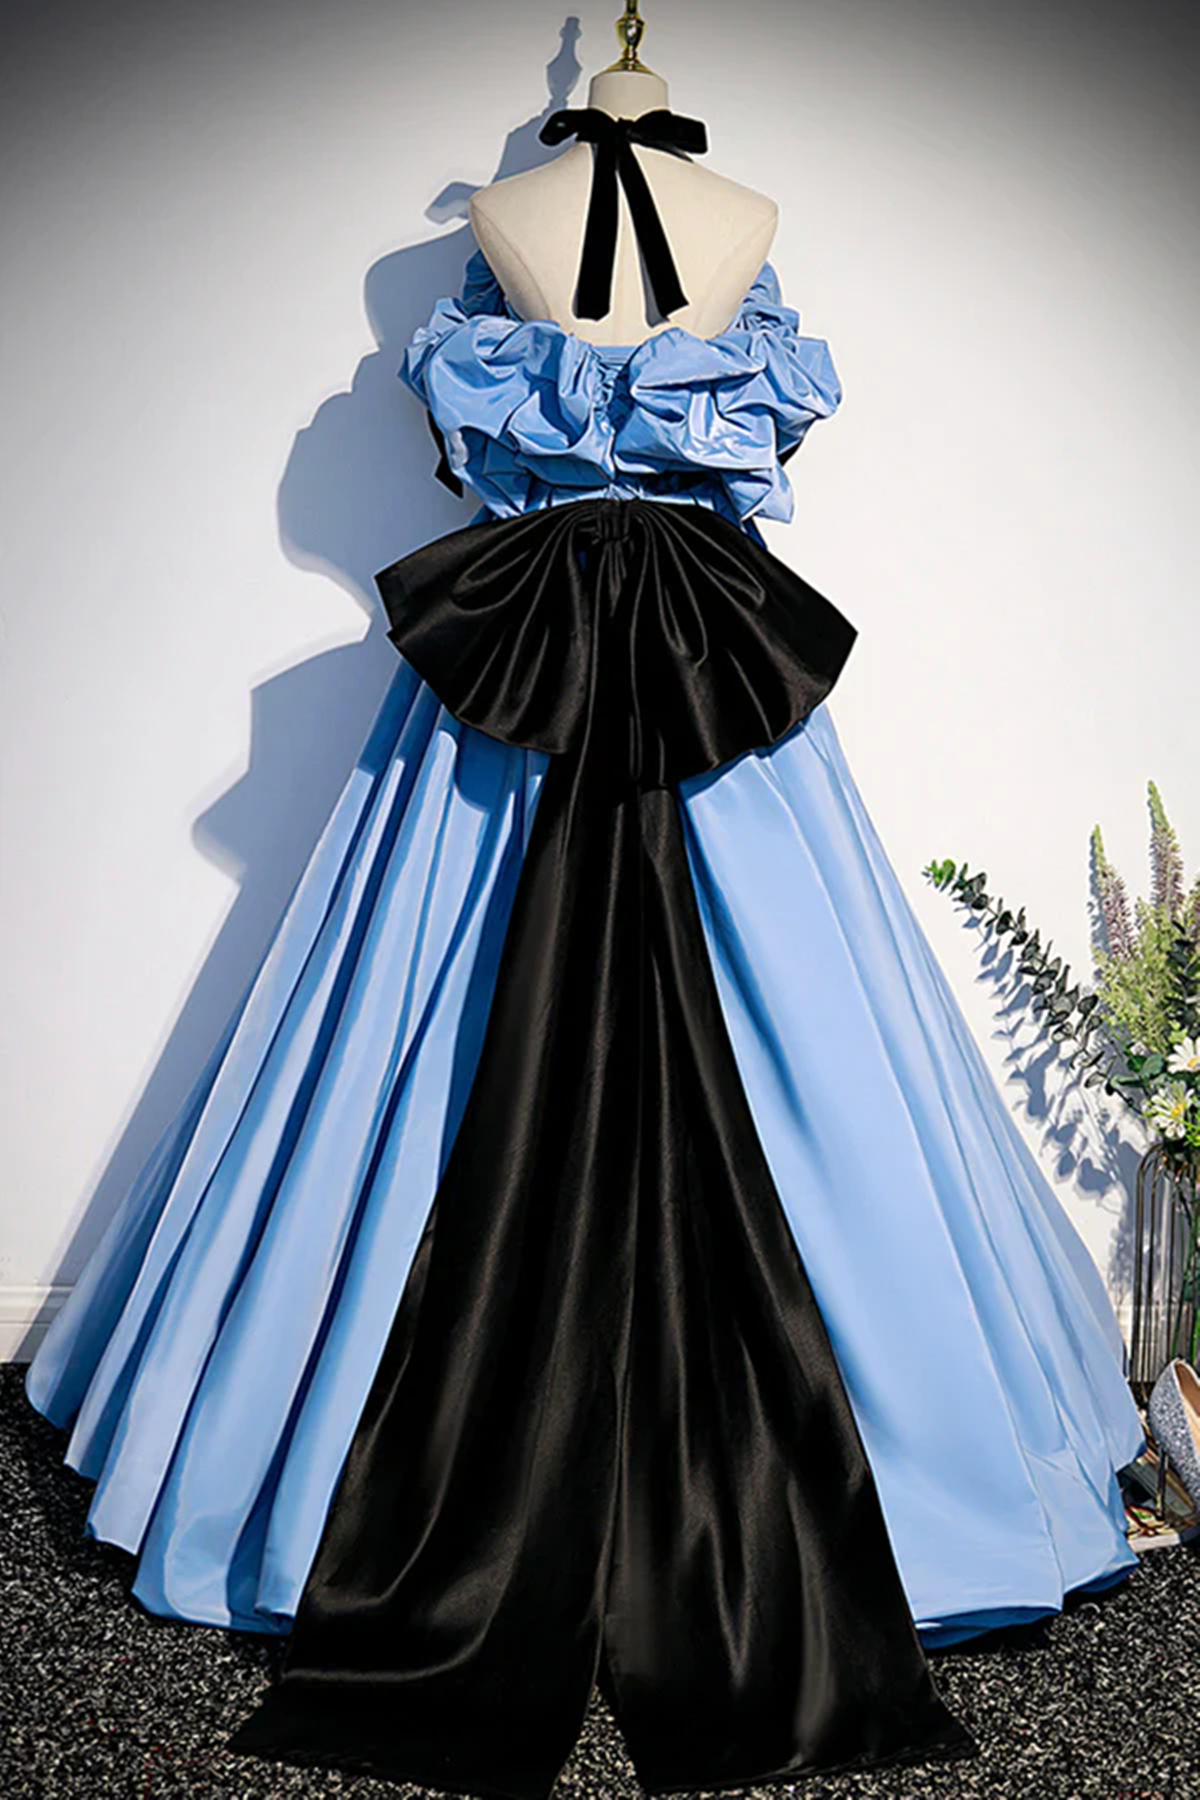 Blue Satin A-line Long Prom Dress with Black Bow, Off the Shoulder Blue Long Party Dress